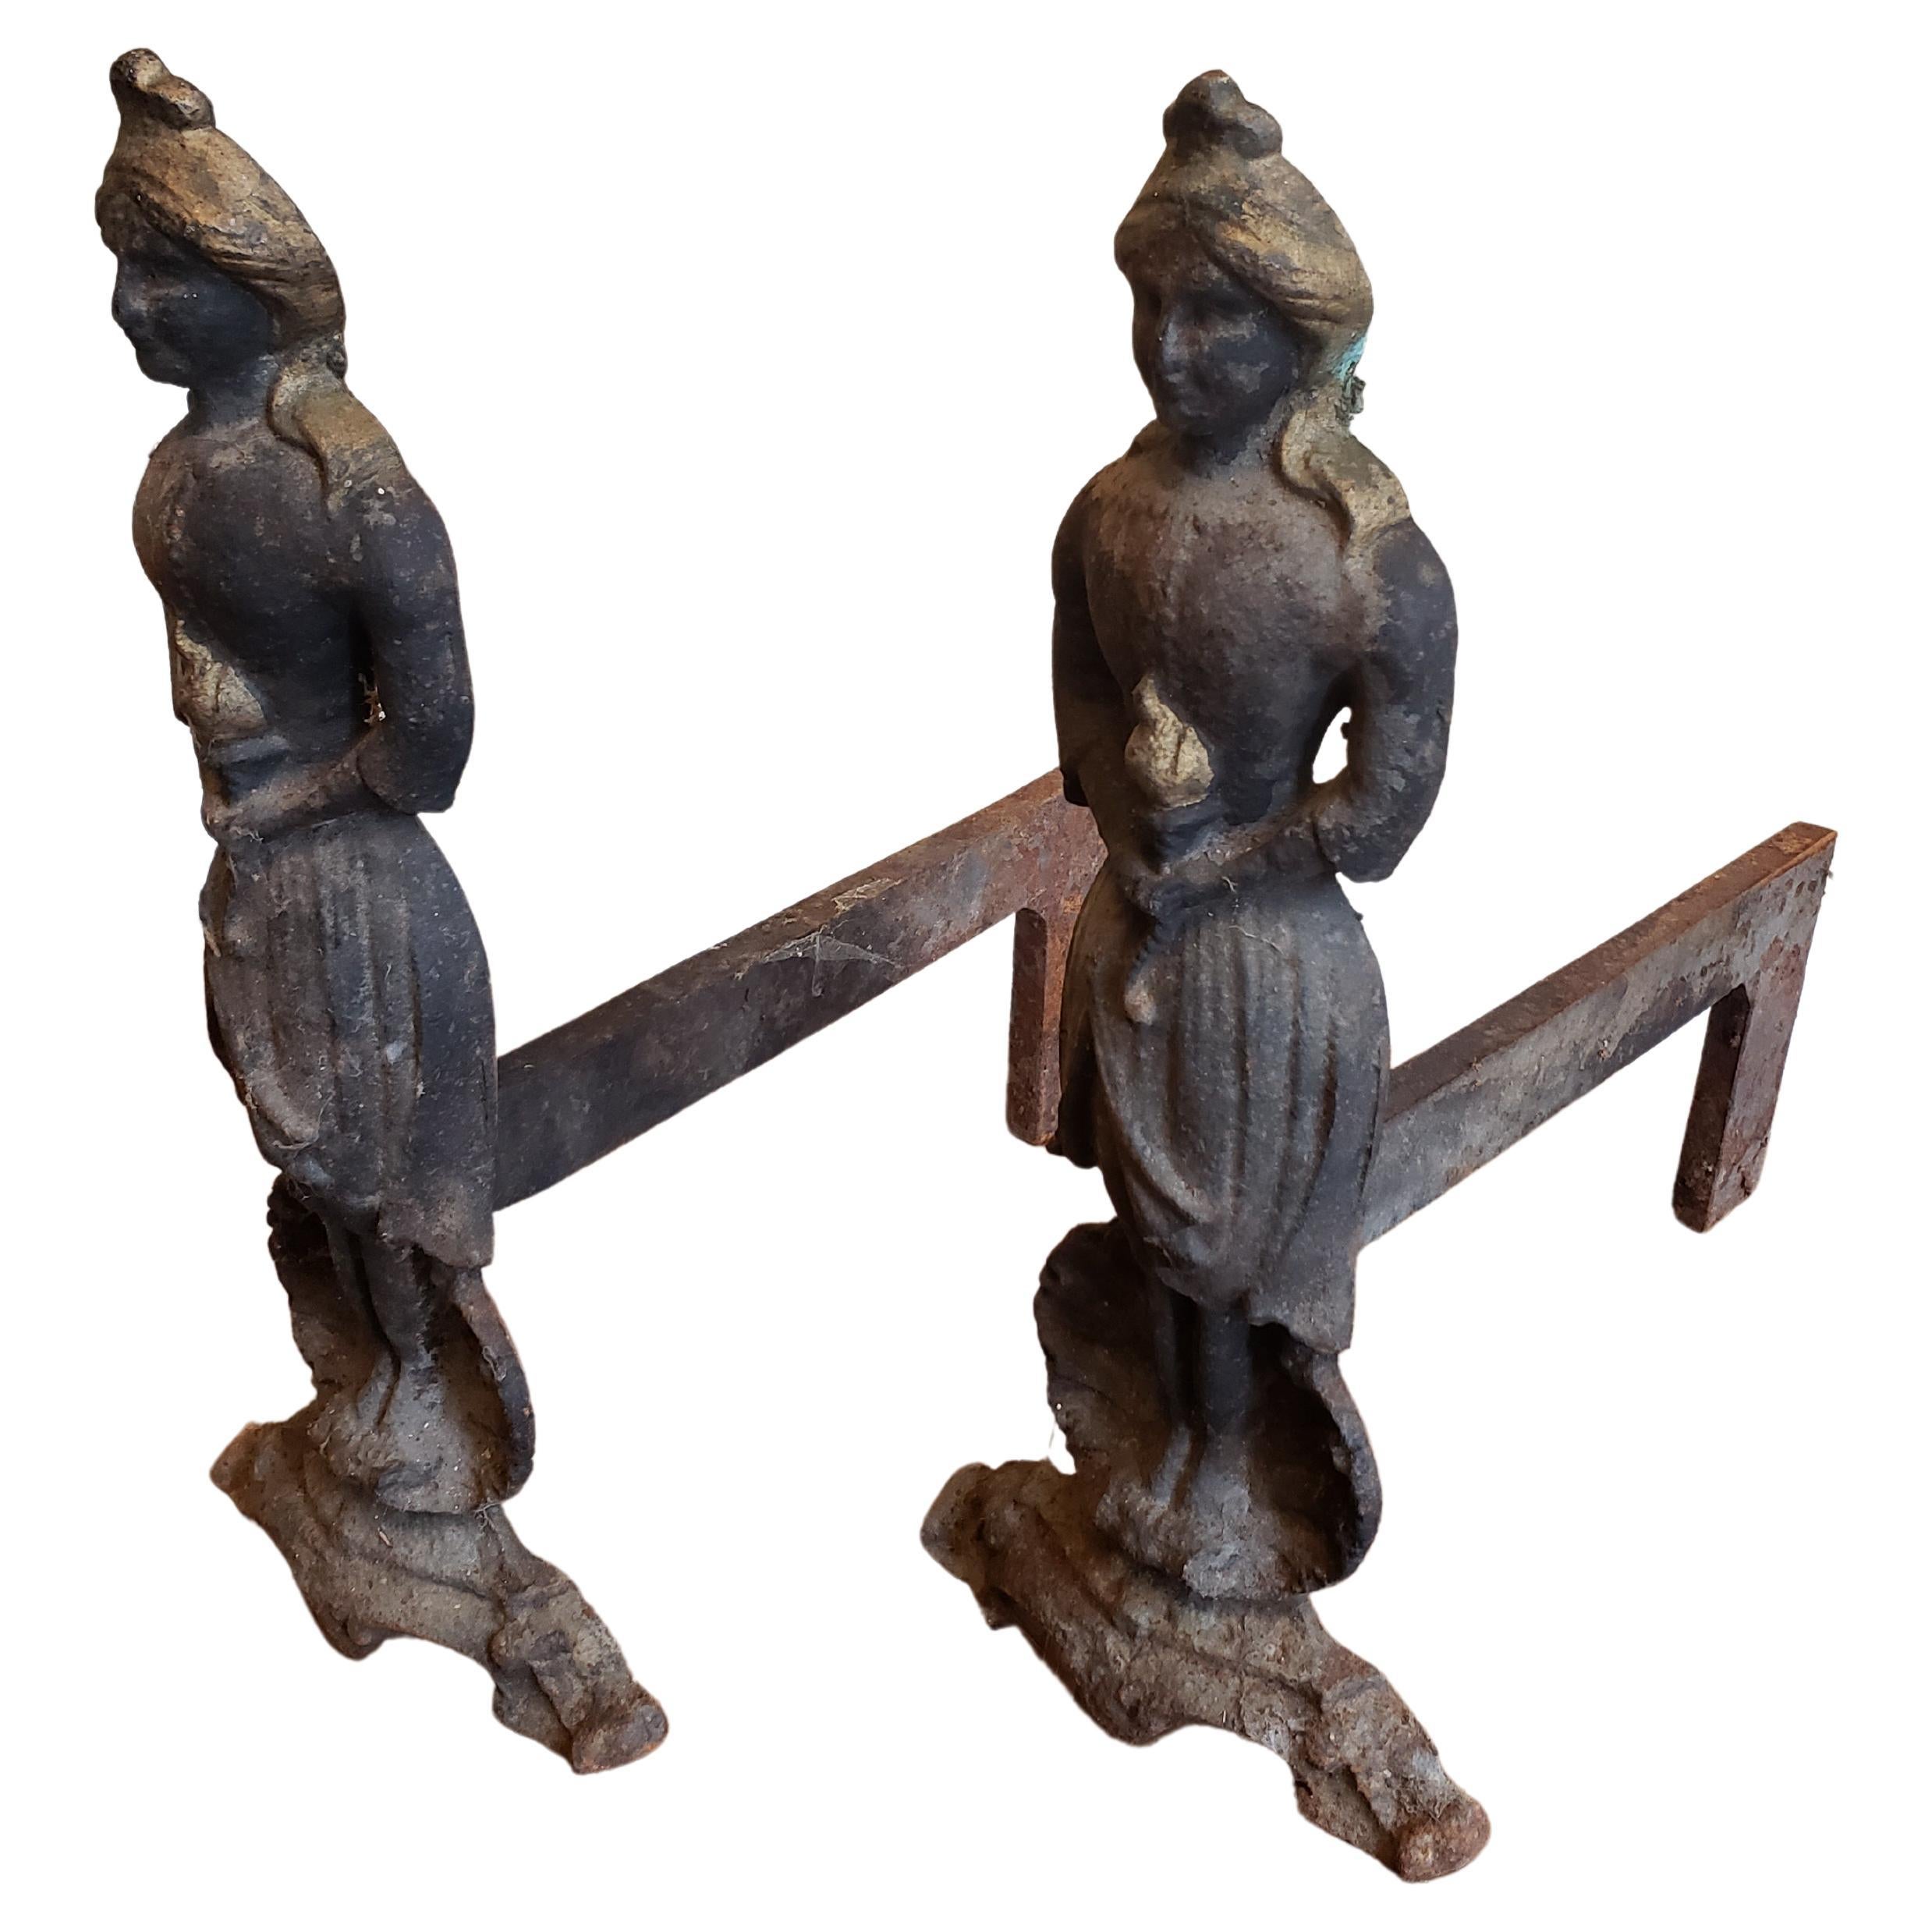 Antique Figural Cast and Wrought Iron Fireplace Andersons, Circa 1860s, a Pair For Sale